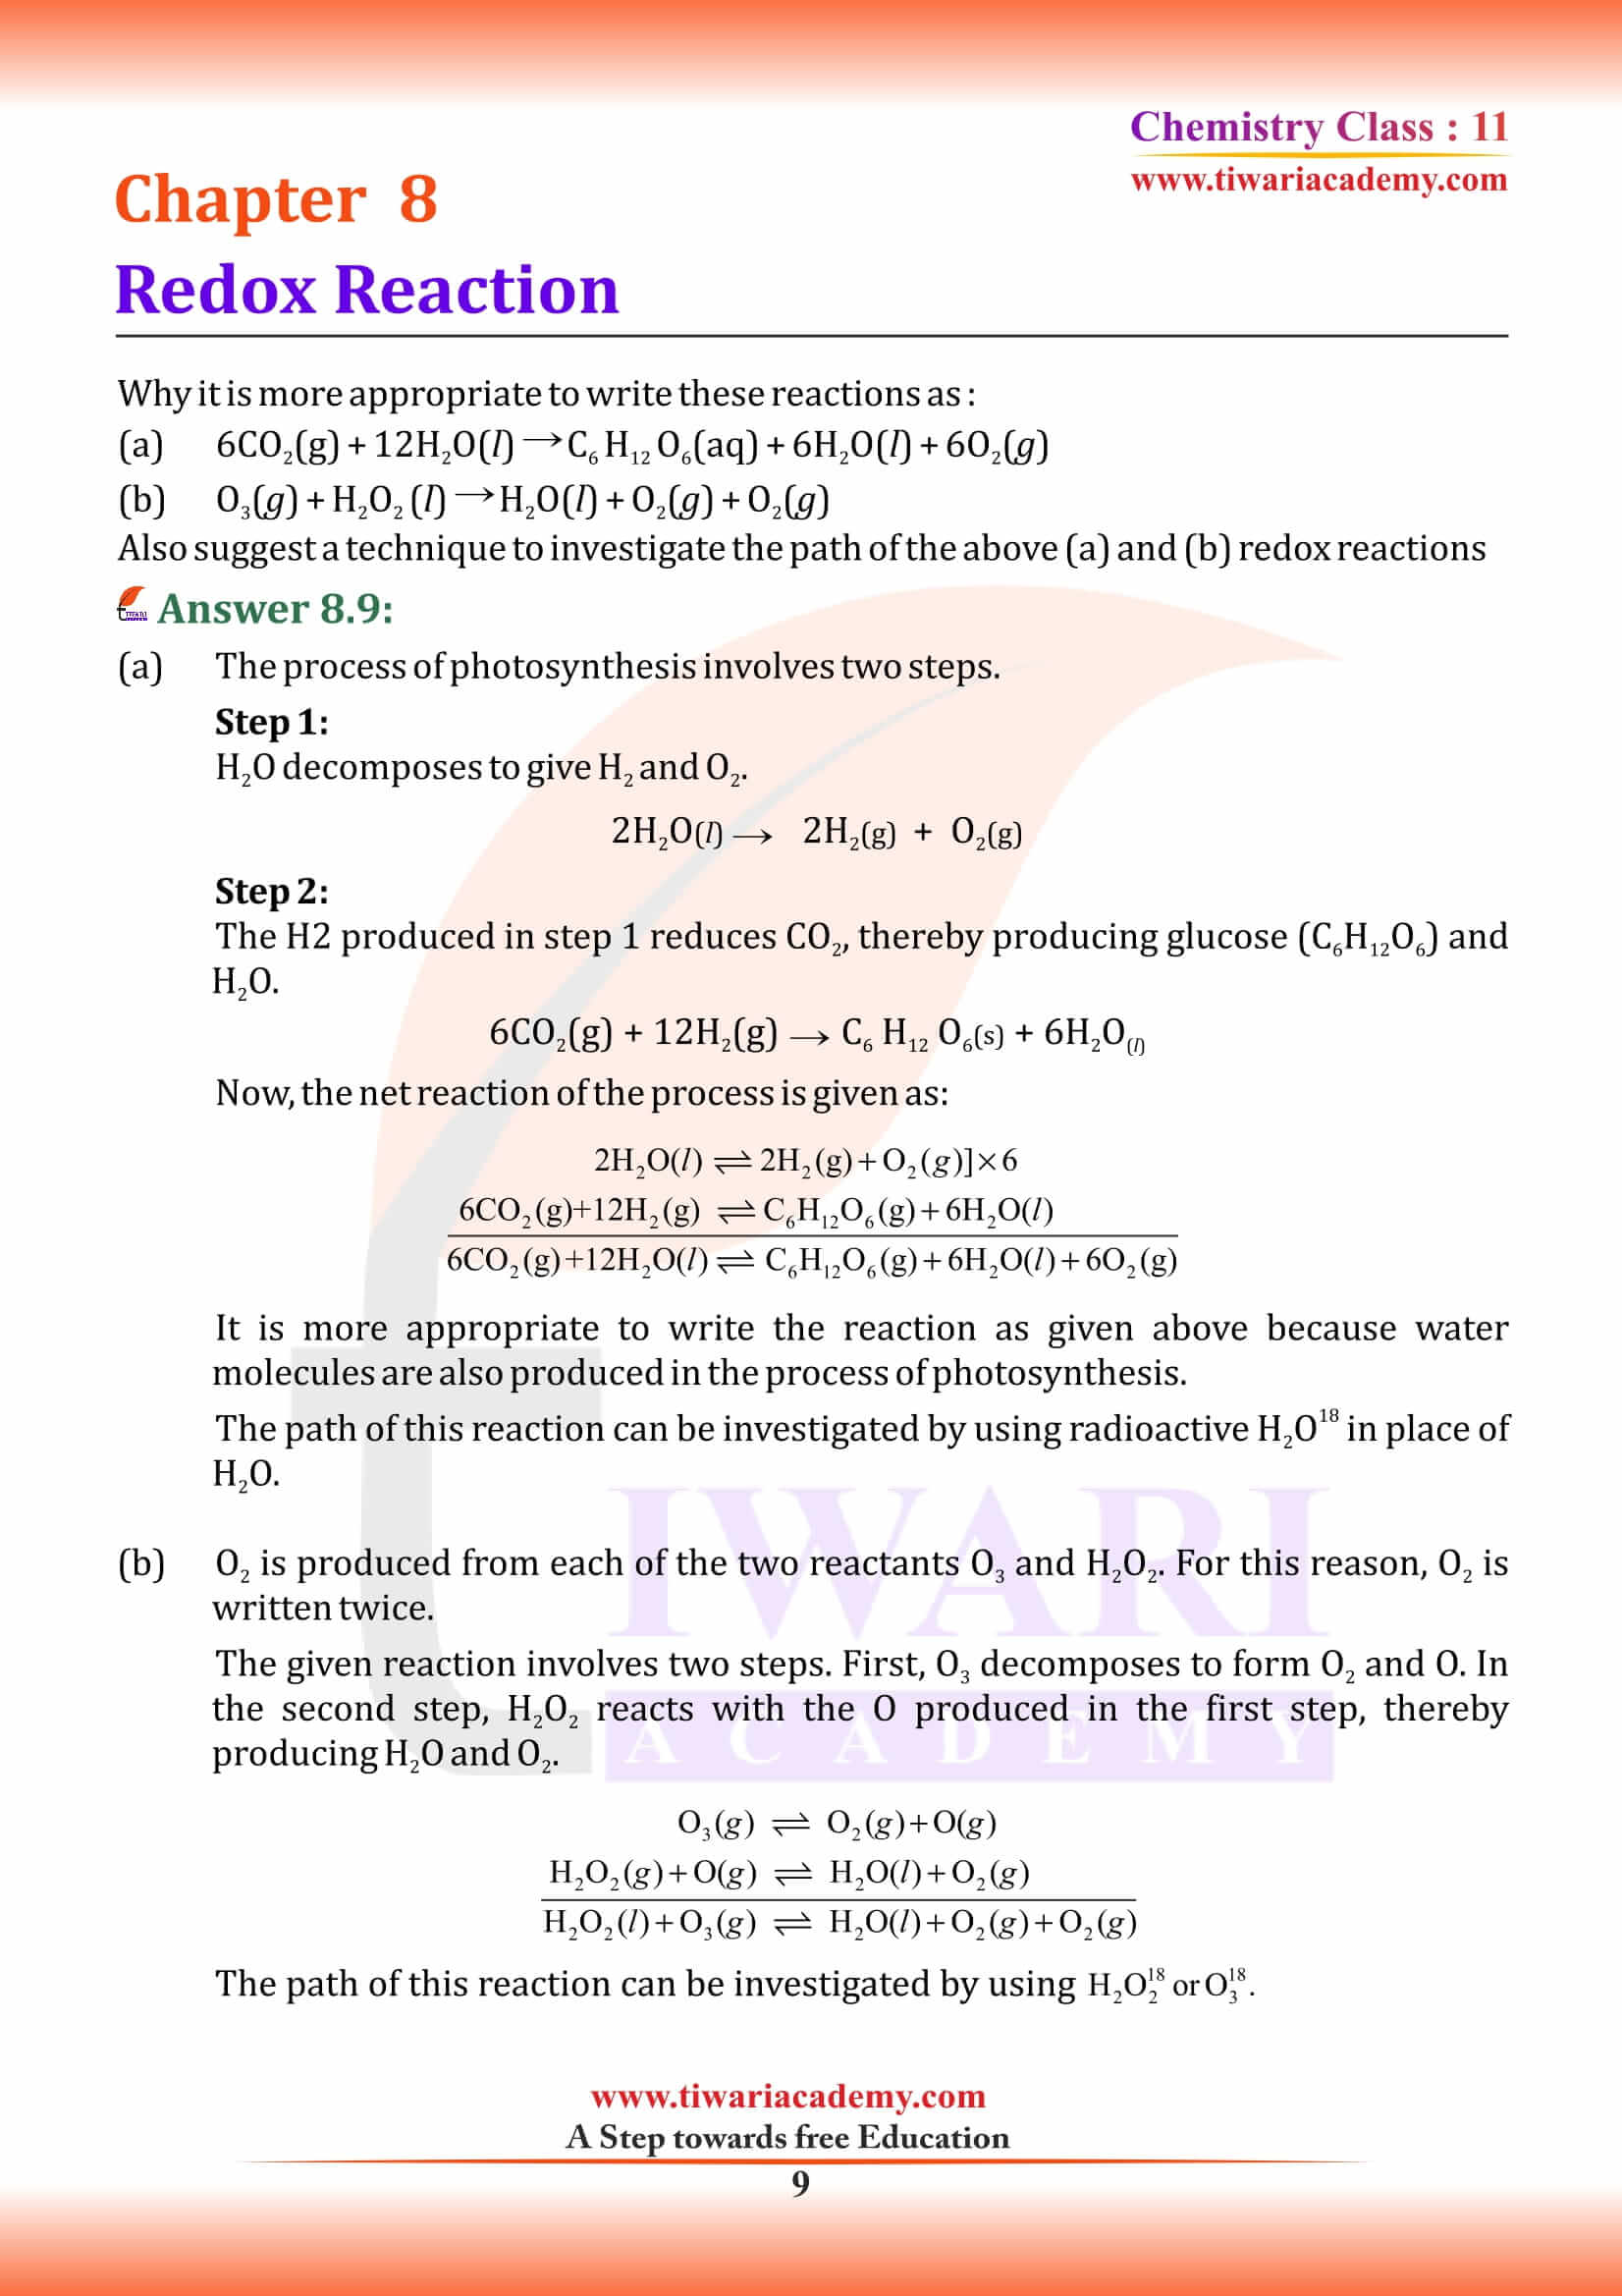 NCERT Solutions for Class 11 Chemistry Chapter 8 MCQ